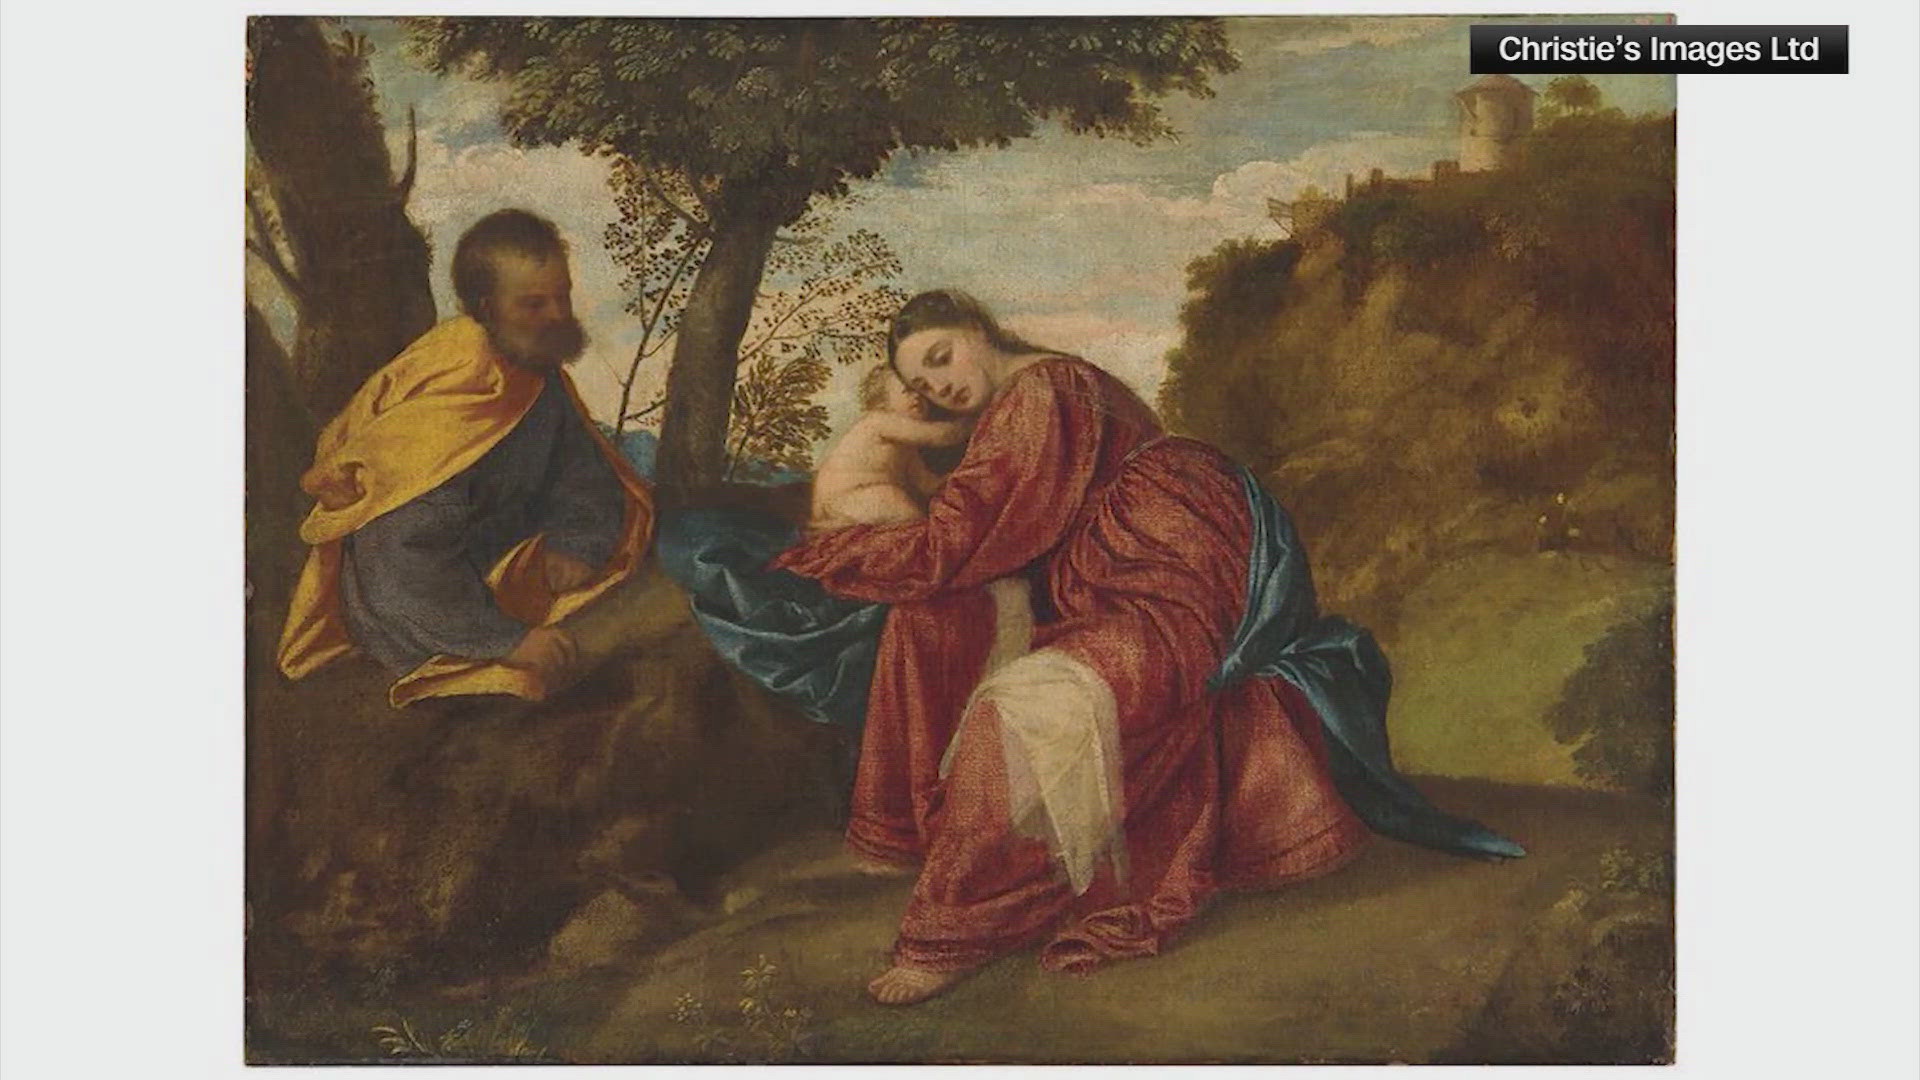 An early 16th-century piece of work called "The Rest on the Flight into Egypt" is one of the earliest works of Italian painter Titian.